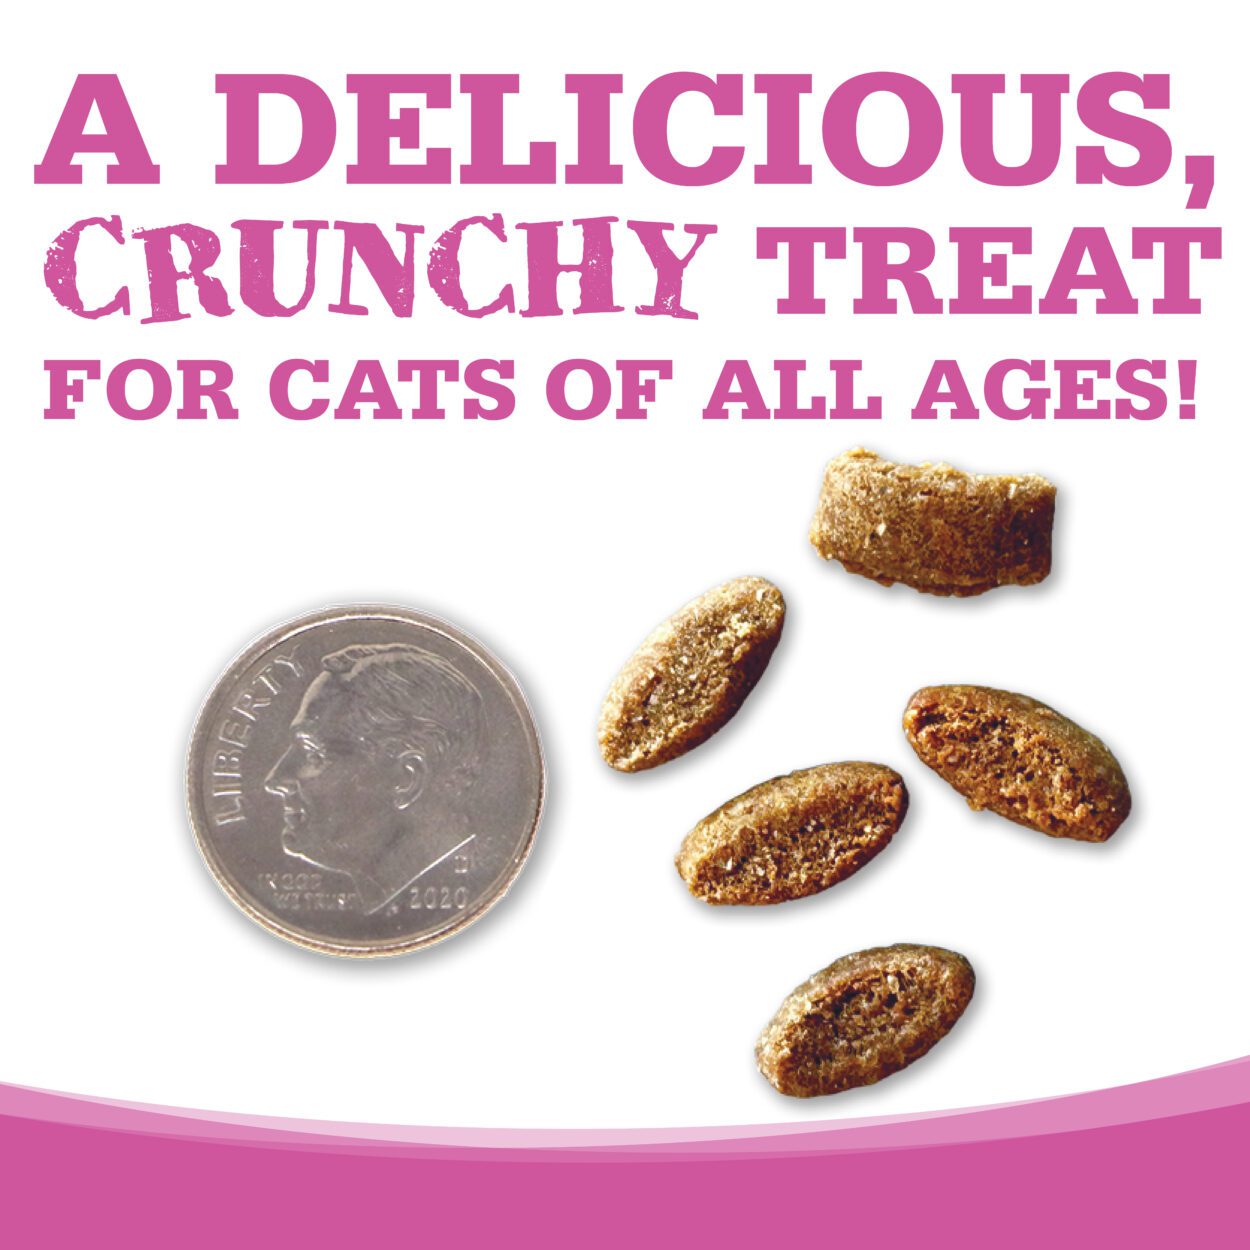 A DELICIOUS, CRUNCHY TREAT FOR CATS OF ALL AGES!